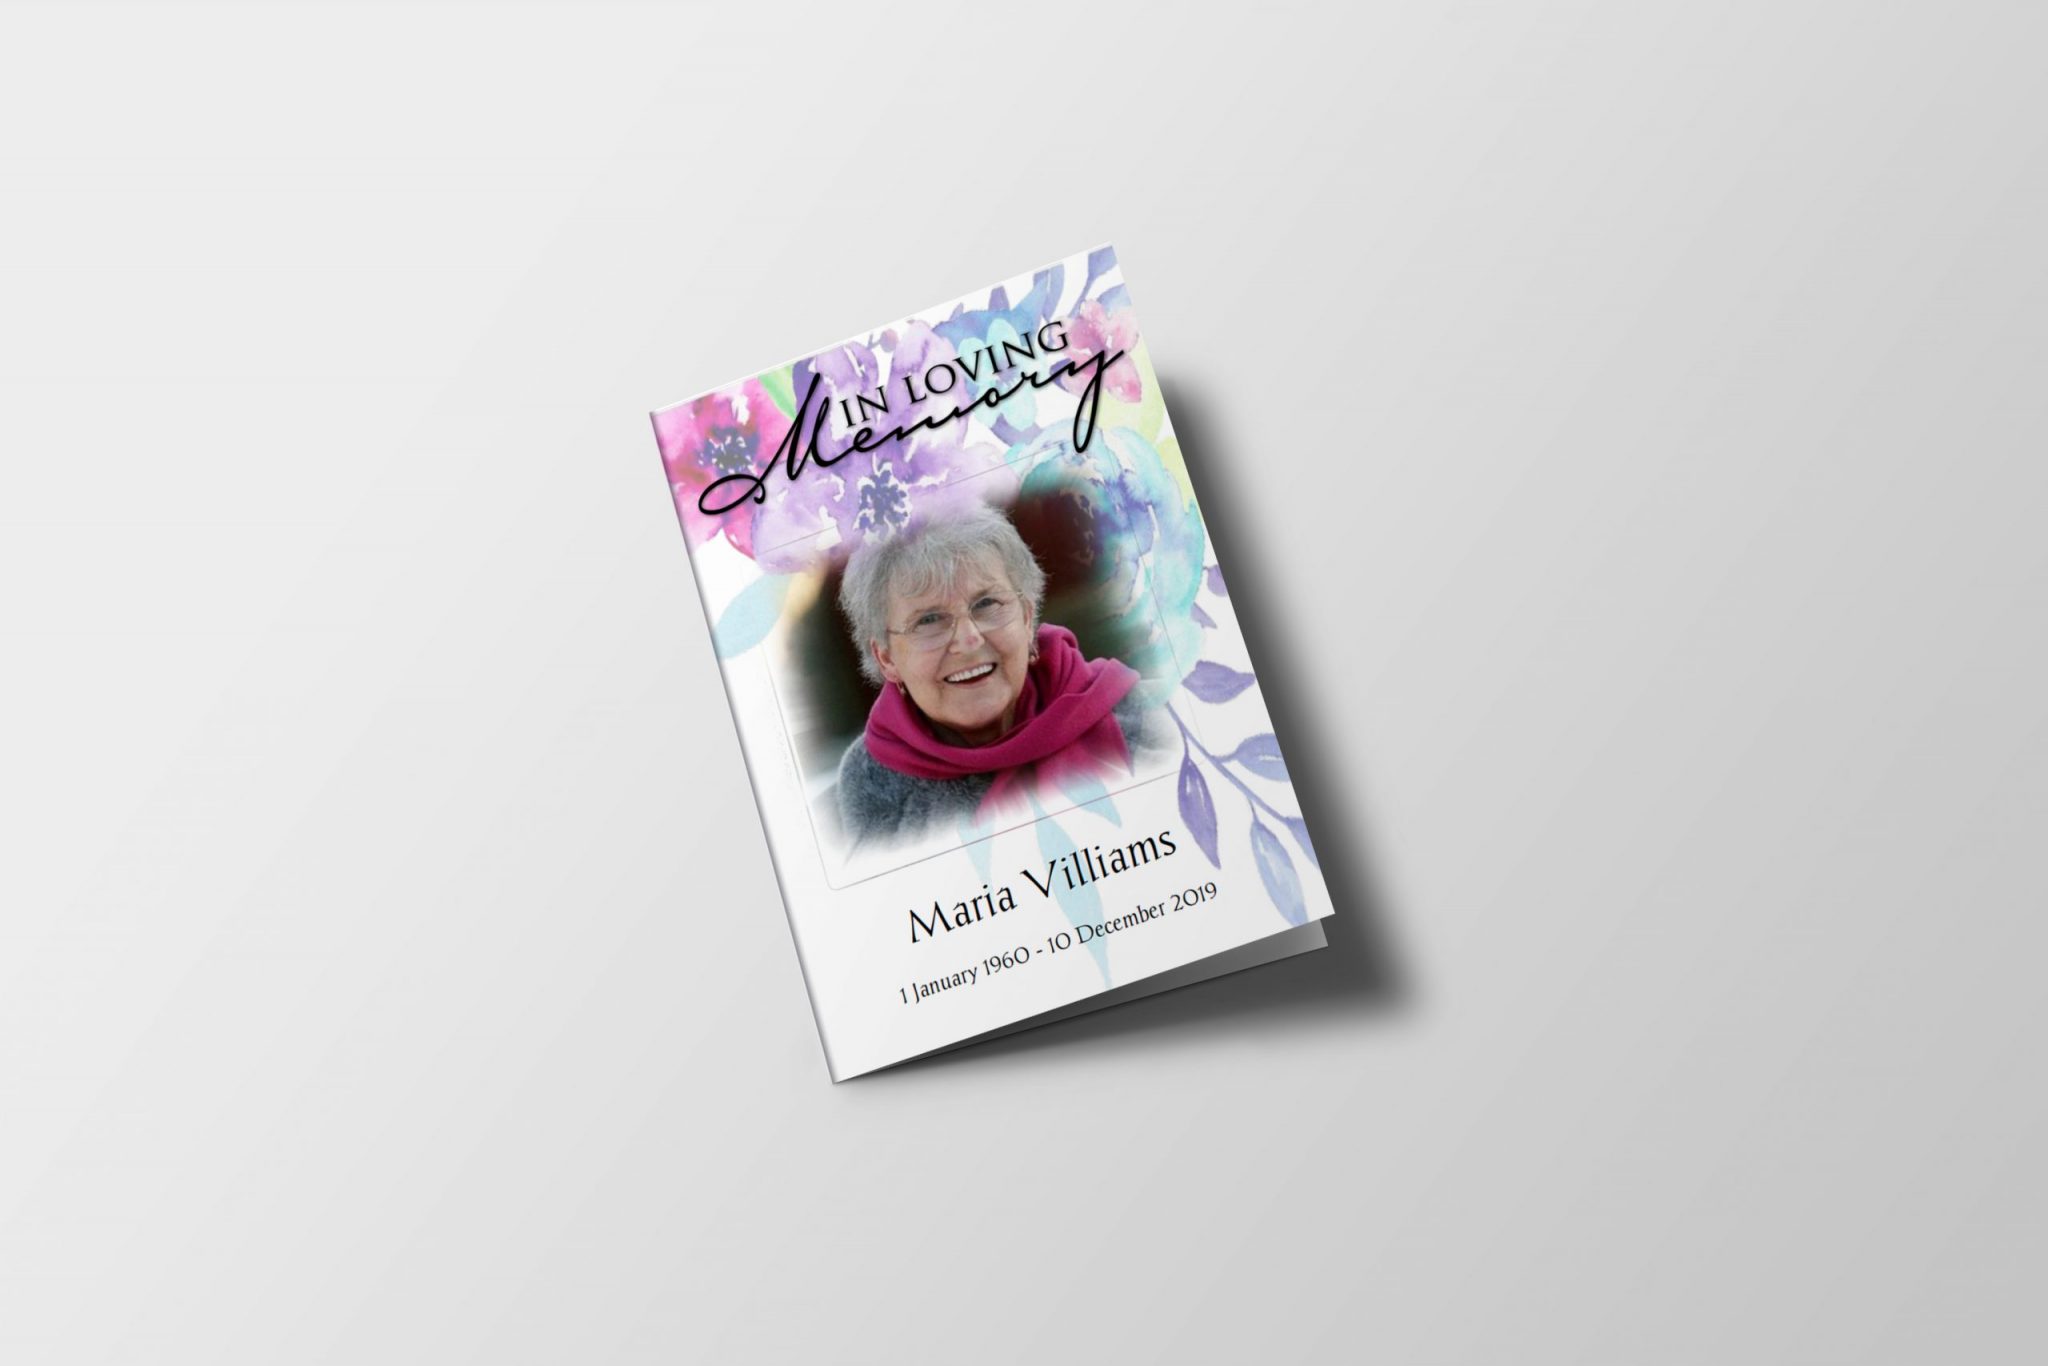 https://d1ihld6xxoauws.cloudfront.net/wp-content/uploads/2020/12/multicolor-floral-funeral-program-template-scaled.jpg